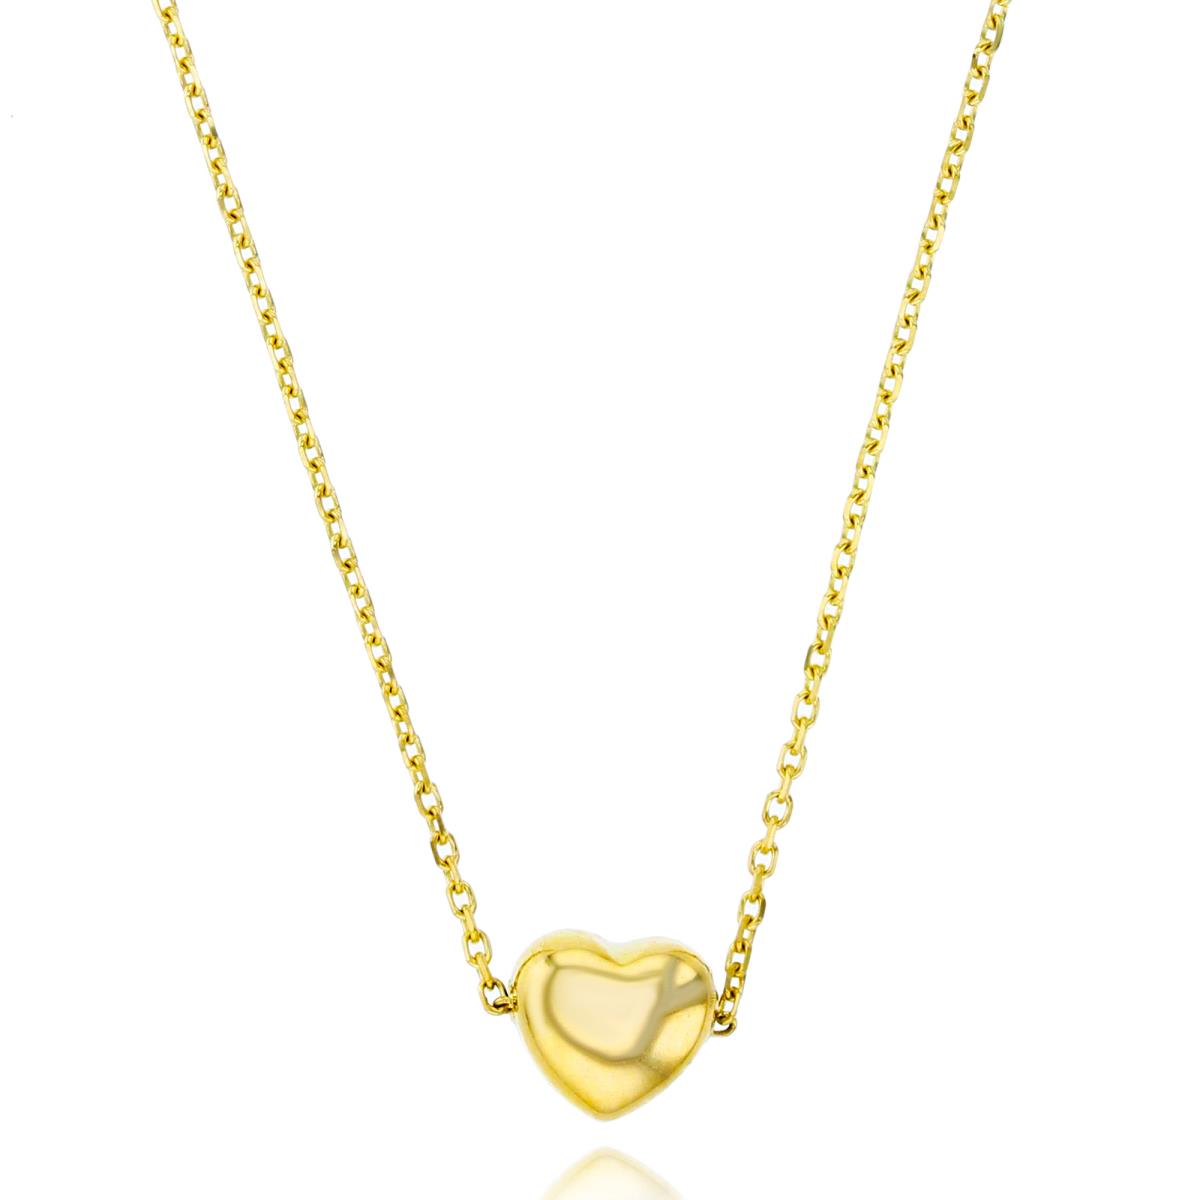 10K Yellow Gold Polished Heart 17" Necklace